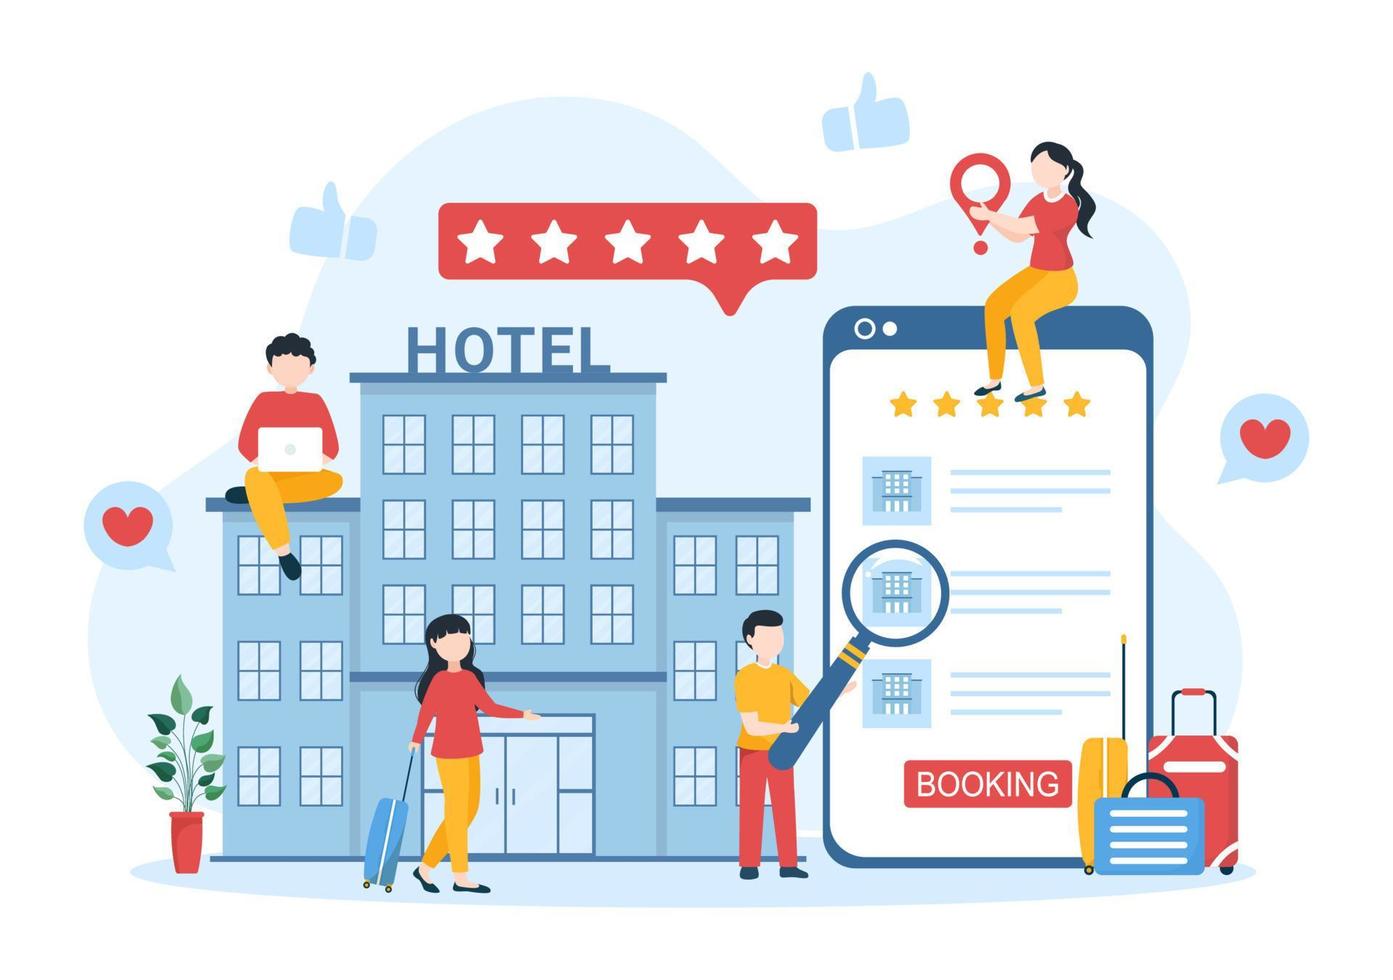 Hotel Review with Rating Service, User Satisfaction to Rated Customer, Product or Experience in Flat Cartoon Hand Drawn Templates Illustration vector